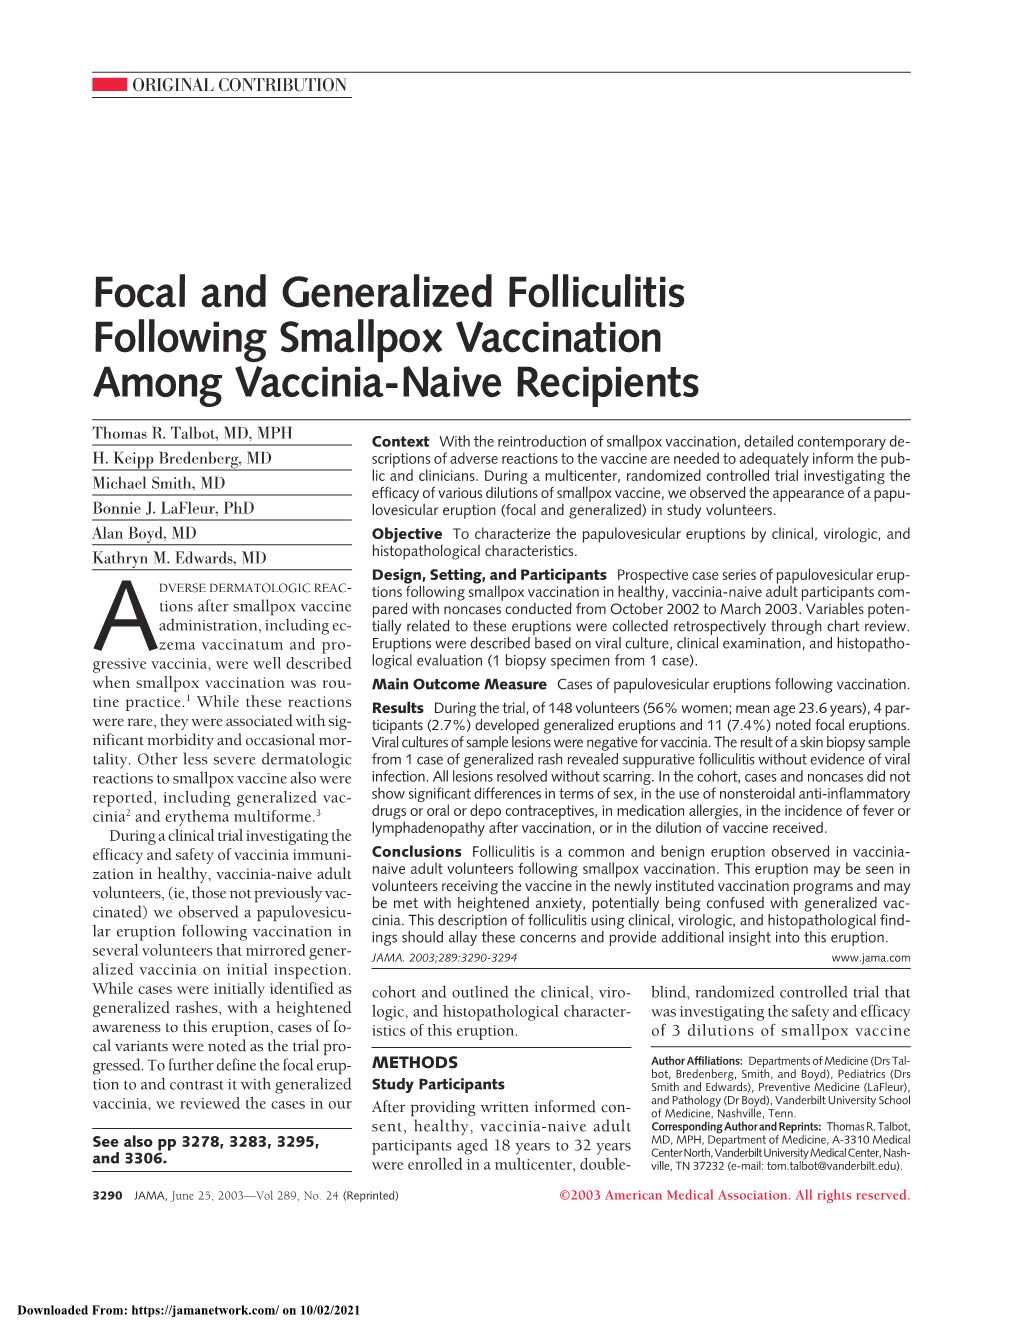 Focal and Generalized Folliculitis Following Smallpox Vaccination Among Vaccinia-Naive Recipients